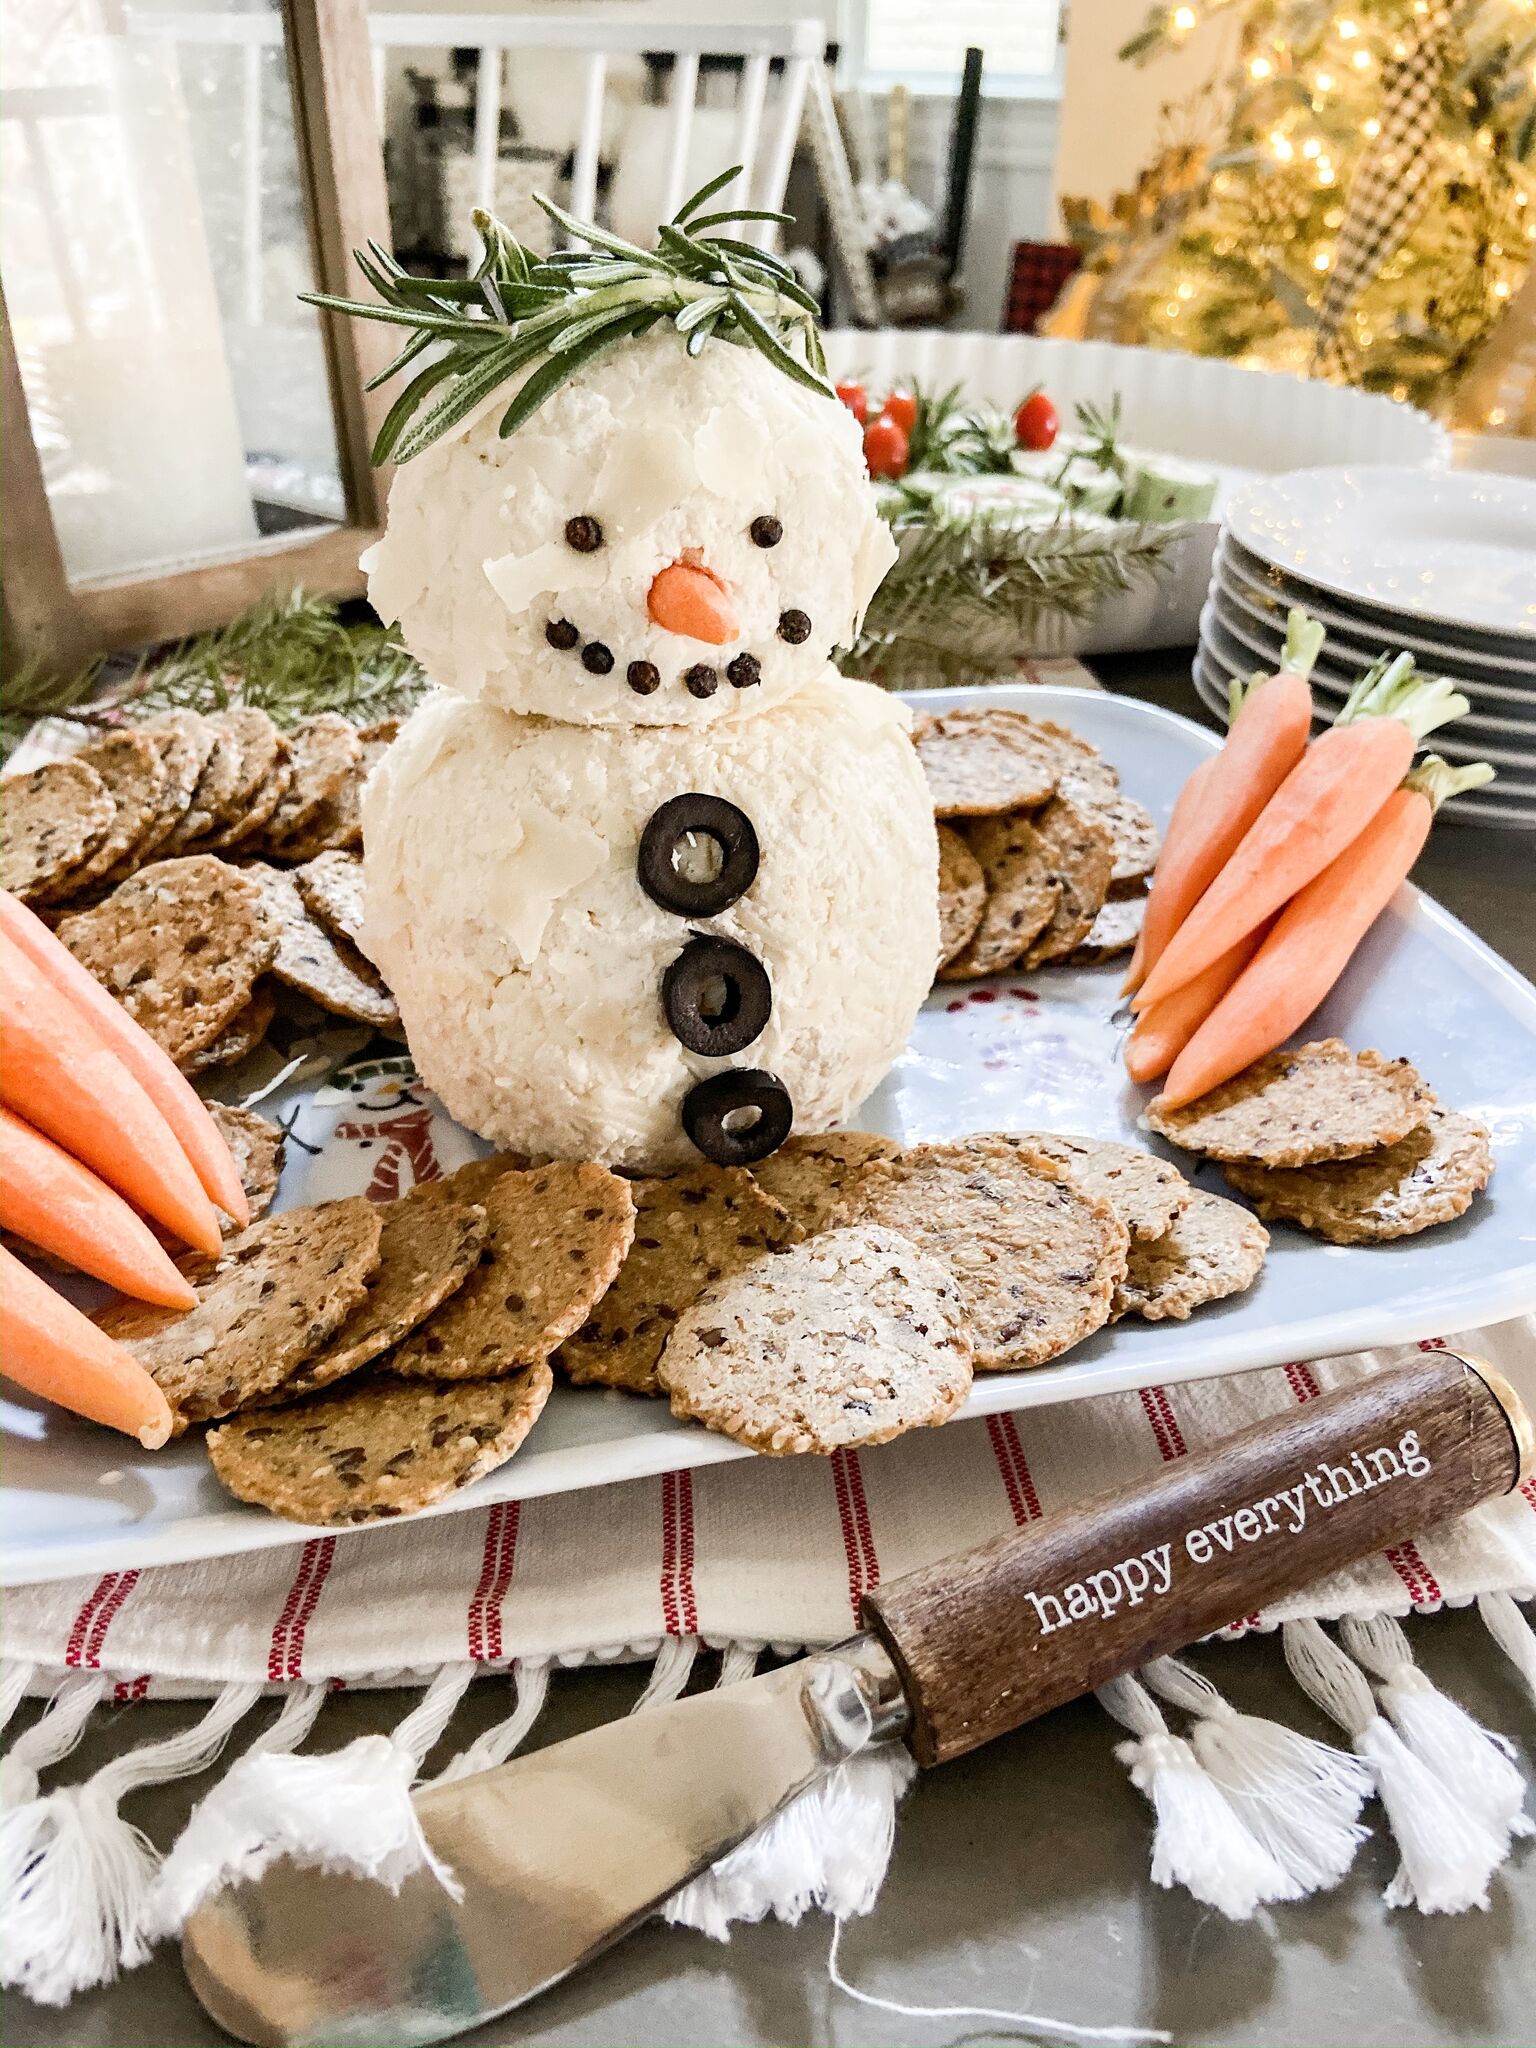 15-Minute Snowman White Cheese Ball Recipe. Mozzarella, cream cheese, Worchesterchire sauce and spices rolled in shaved Parmesan cheese. Divide the cheese ball into two parts and make it into a delightful snowman that will be the hit of any holiday or Winter party! 